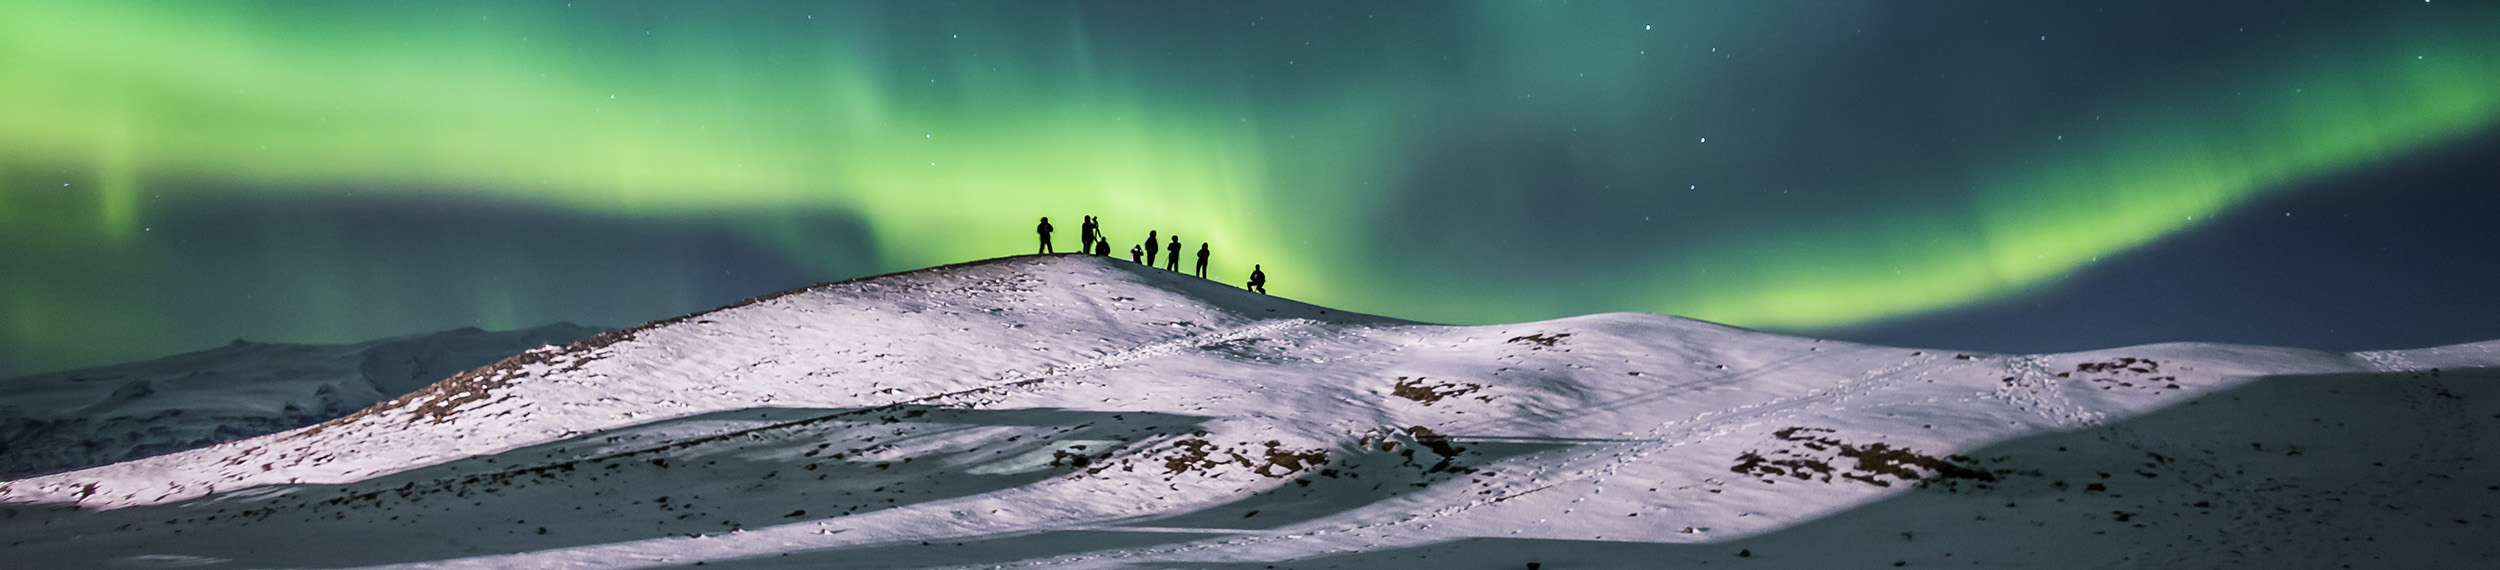 People walk in the snow under the Northen Lights in Iceland. 